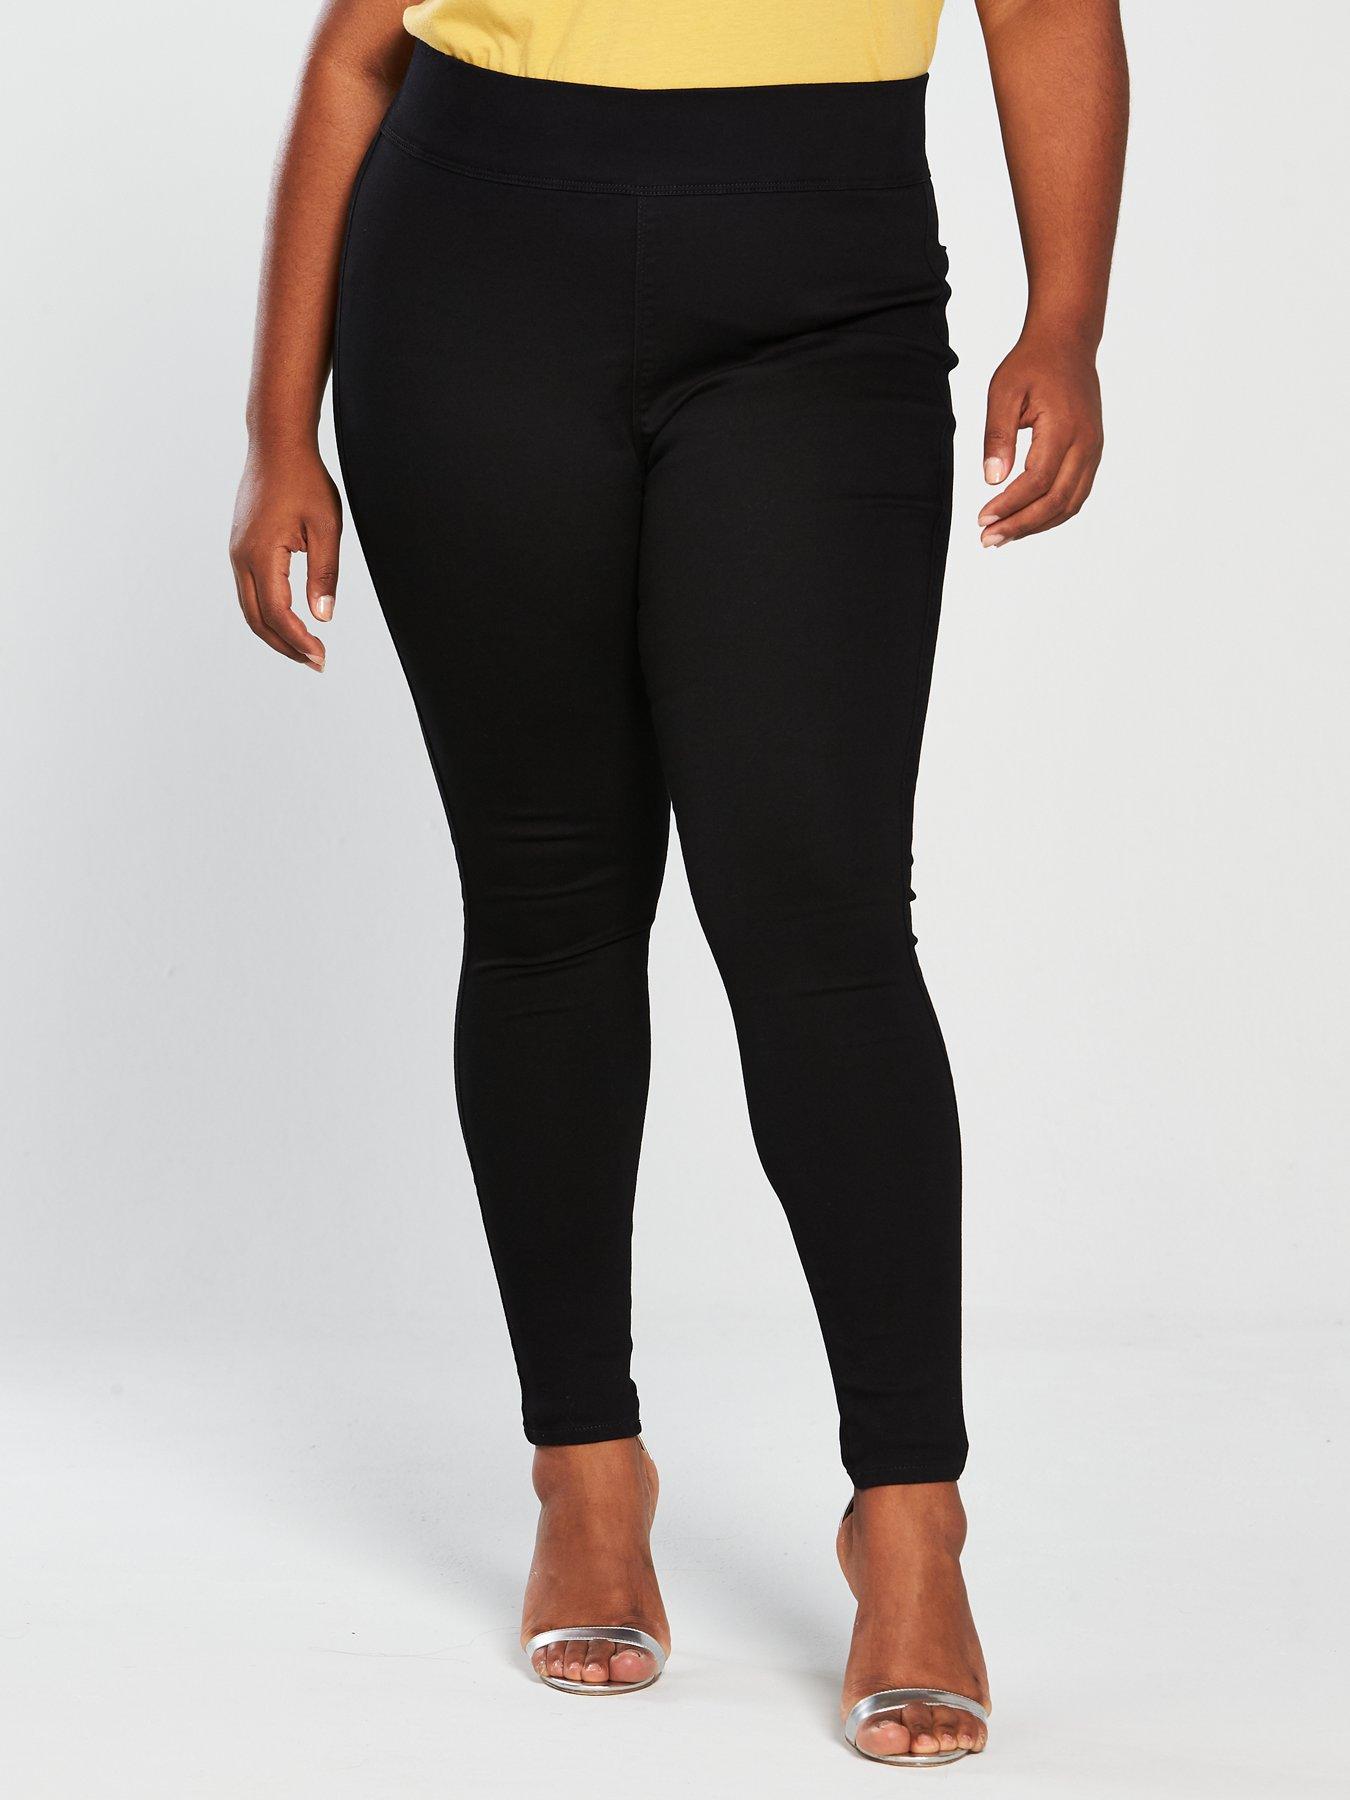 Plus Size Jeans | Women's Curved Jeans Very.co.uk